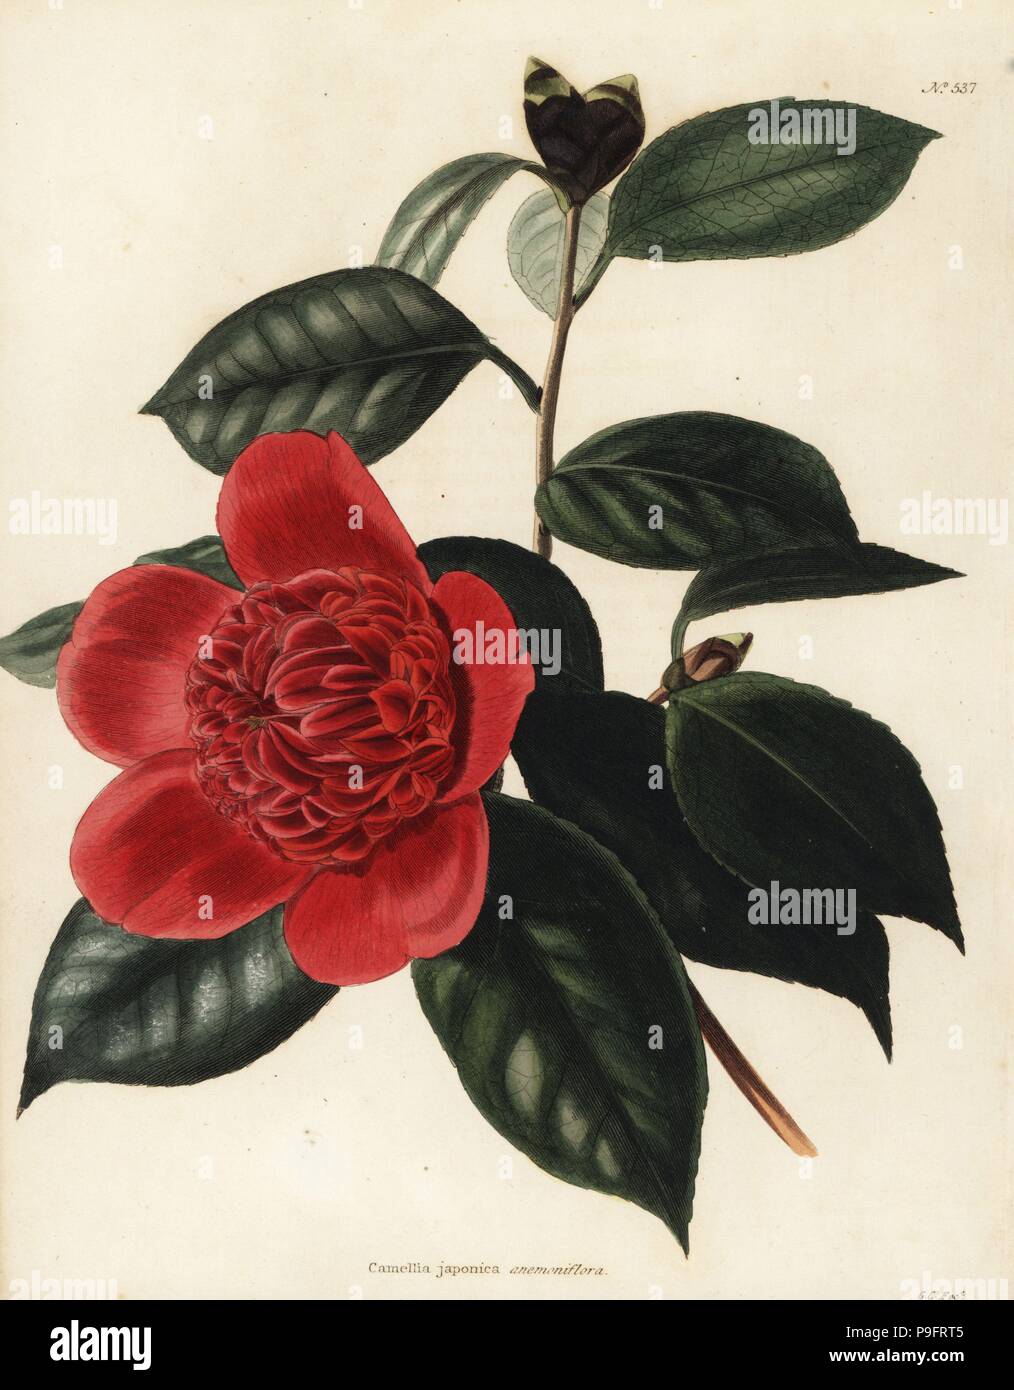 Camellia japonica anemoniflora. Handcoloured copperplate engraving by George Cooke after George Loddiges from Conrad Loddiges' Botanical Cabinet, Hackney, 1818. Stock Photo